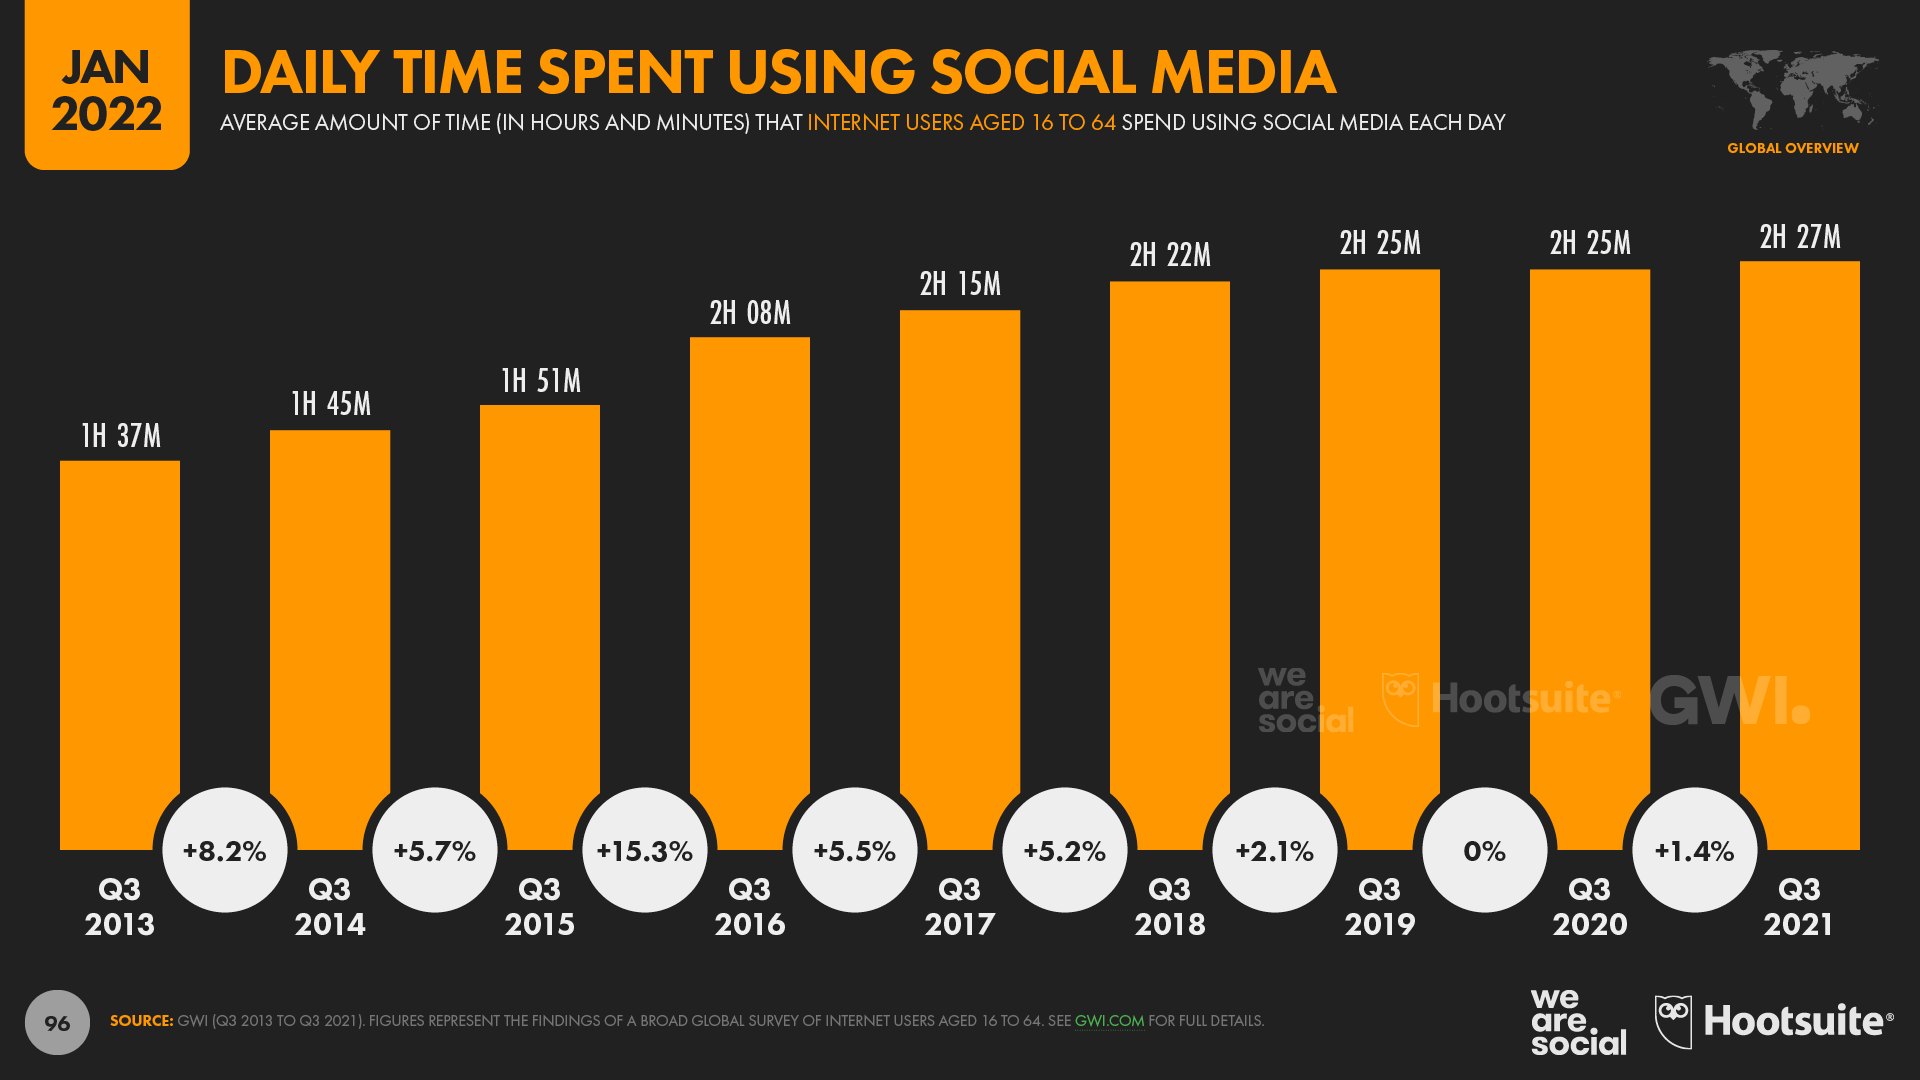 chart showing daily time spent using social media